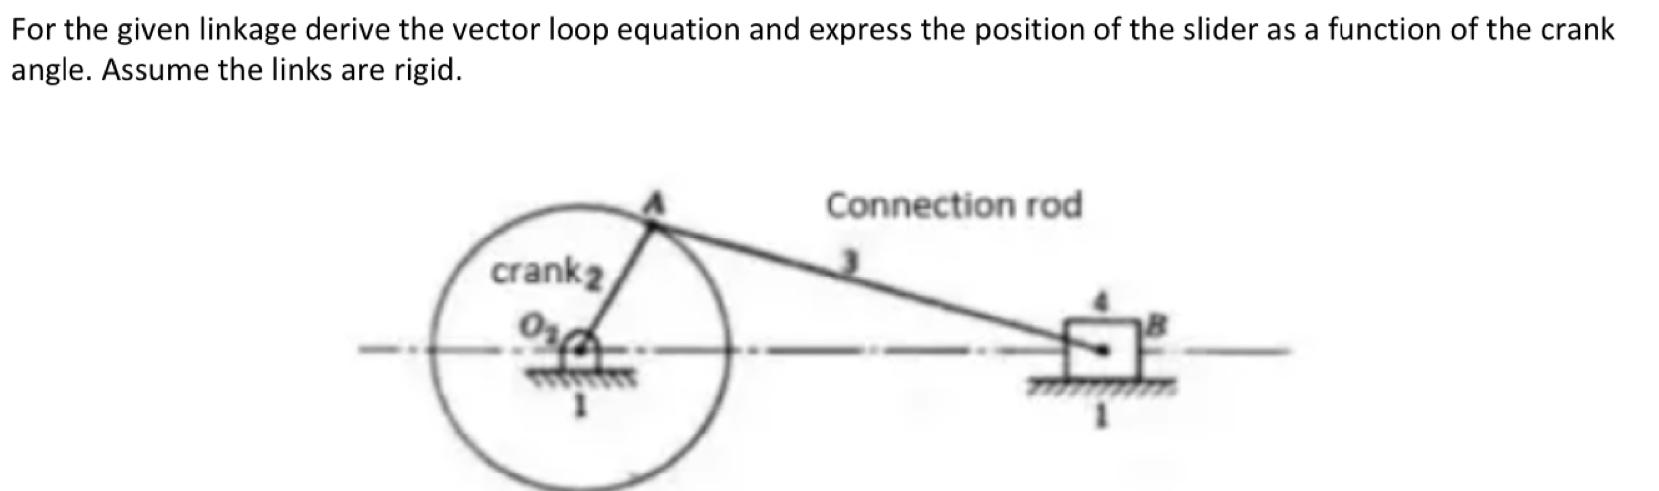 For the given linkage derive the vector loop equation and express the position of the slider as a function of